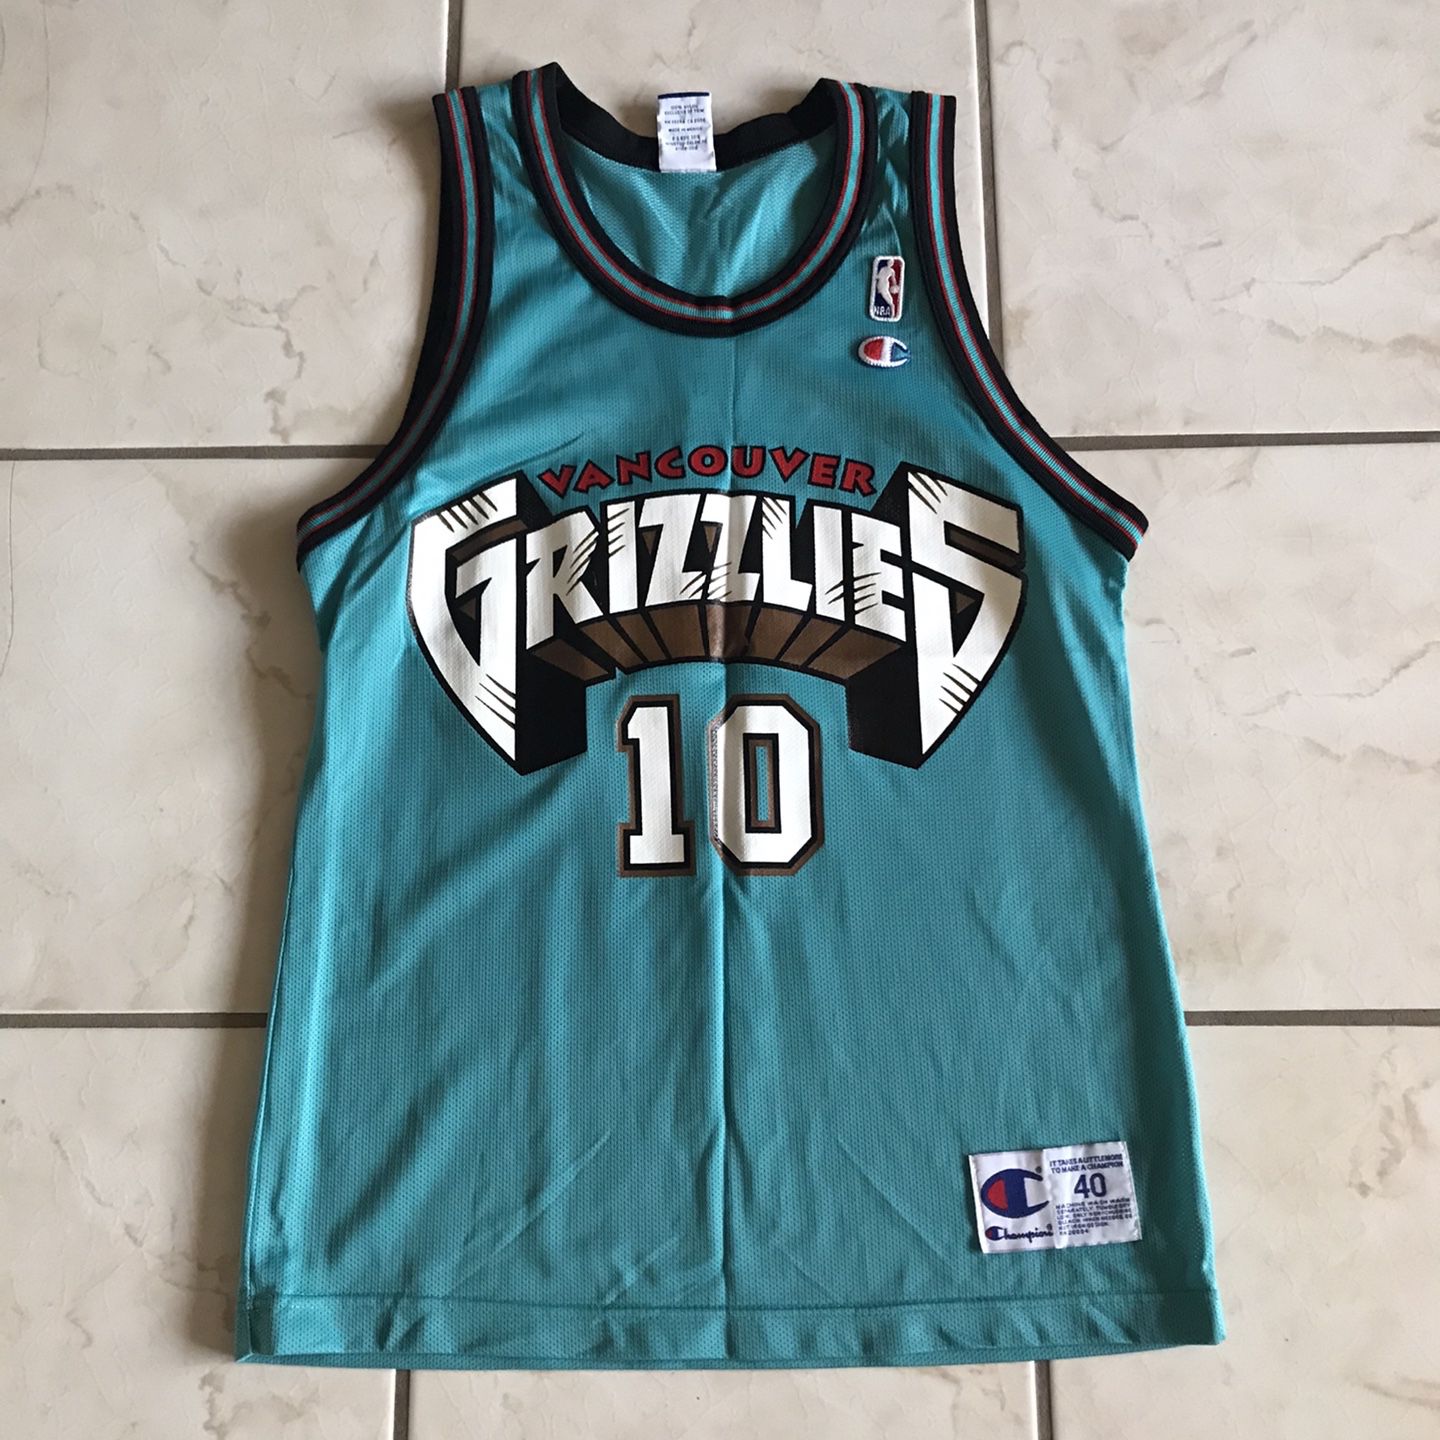 Mike Bibby #10 Vancouver Grizzlies Throwback Jersey for Sale in Pensacola,  FL - OfferUp